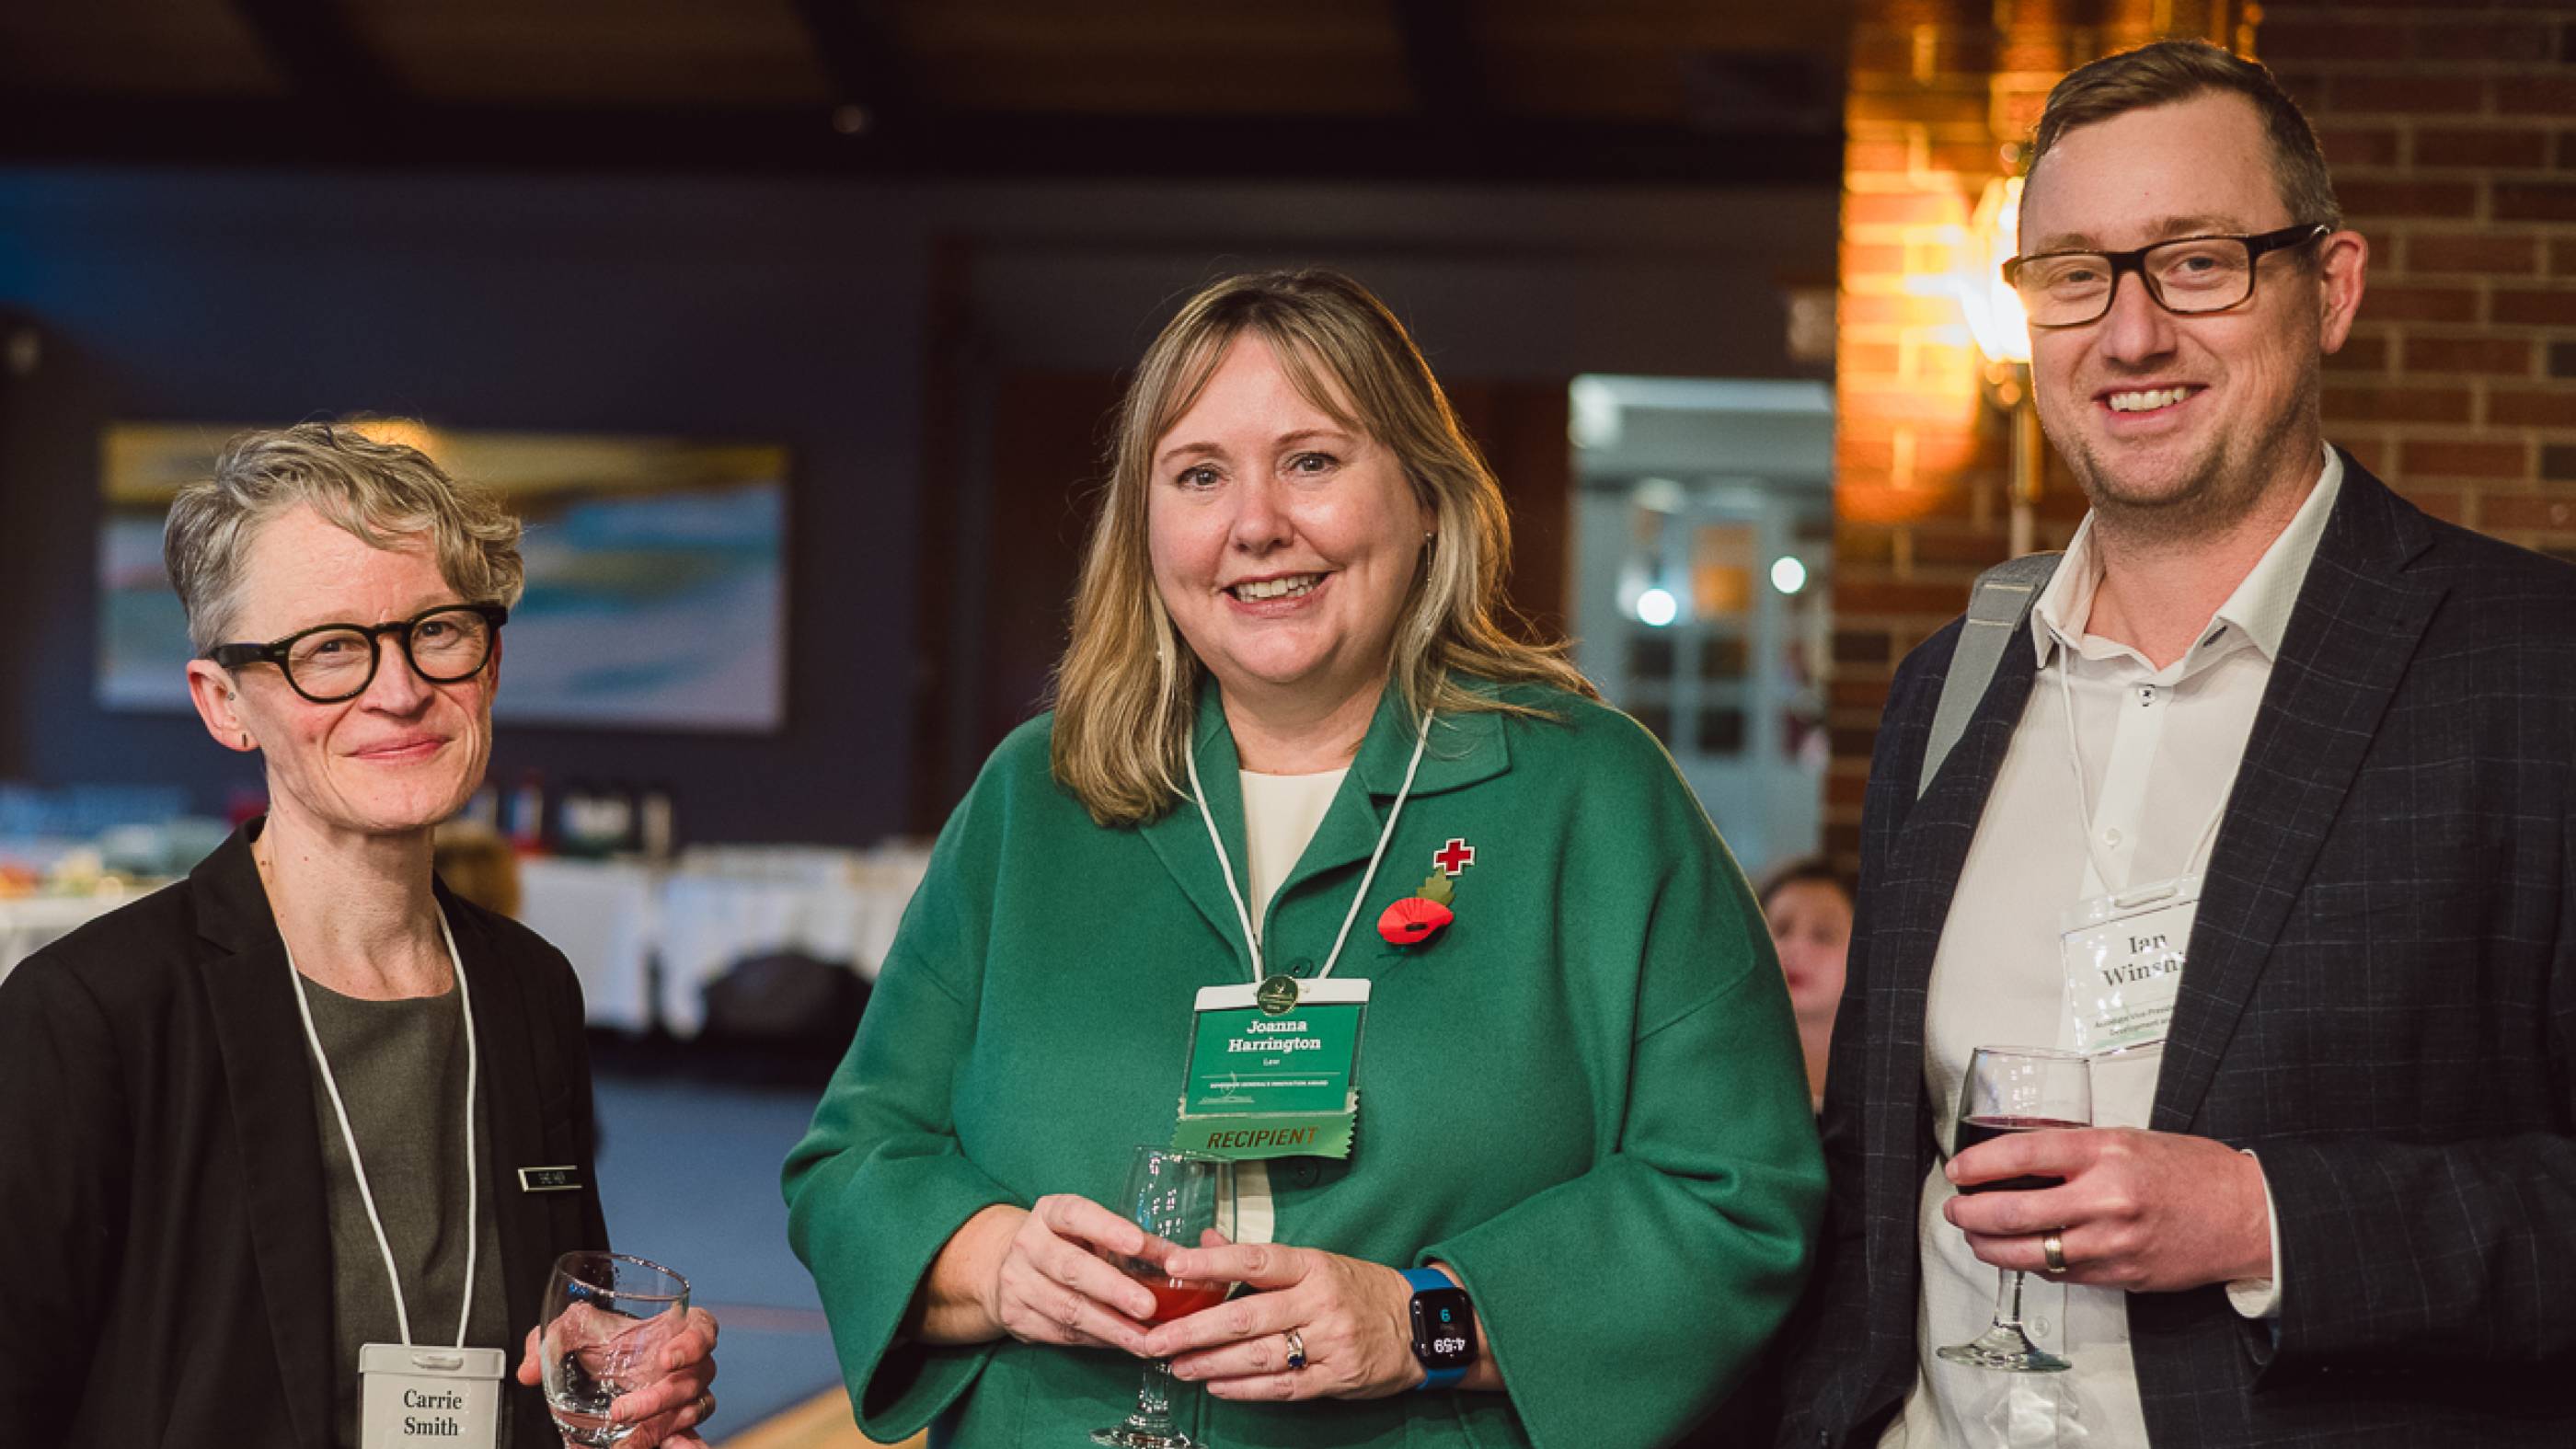 (left to right) Carrie Smith, Vice-Provost (Equity, Diversity, and Inclusion), Joanna Harrington, recipient of the Governor General’s Innovation Award and Ian Winship, Associate Vice-President (Research Development and Services)